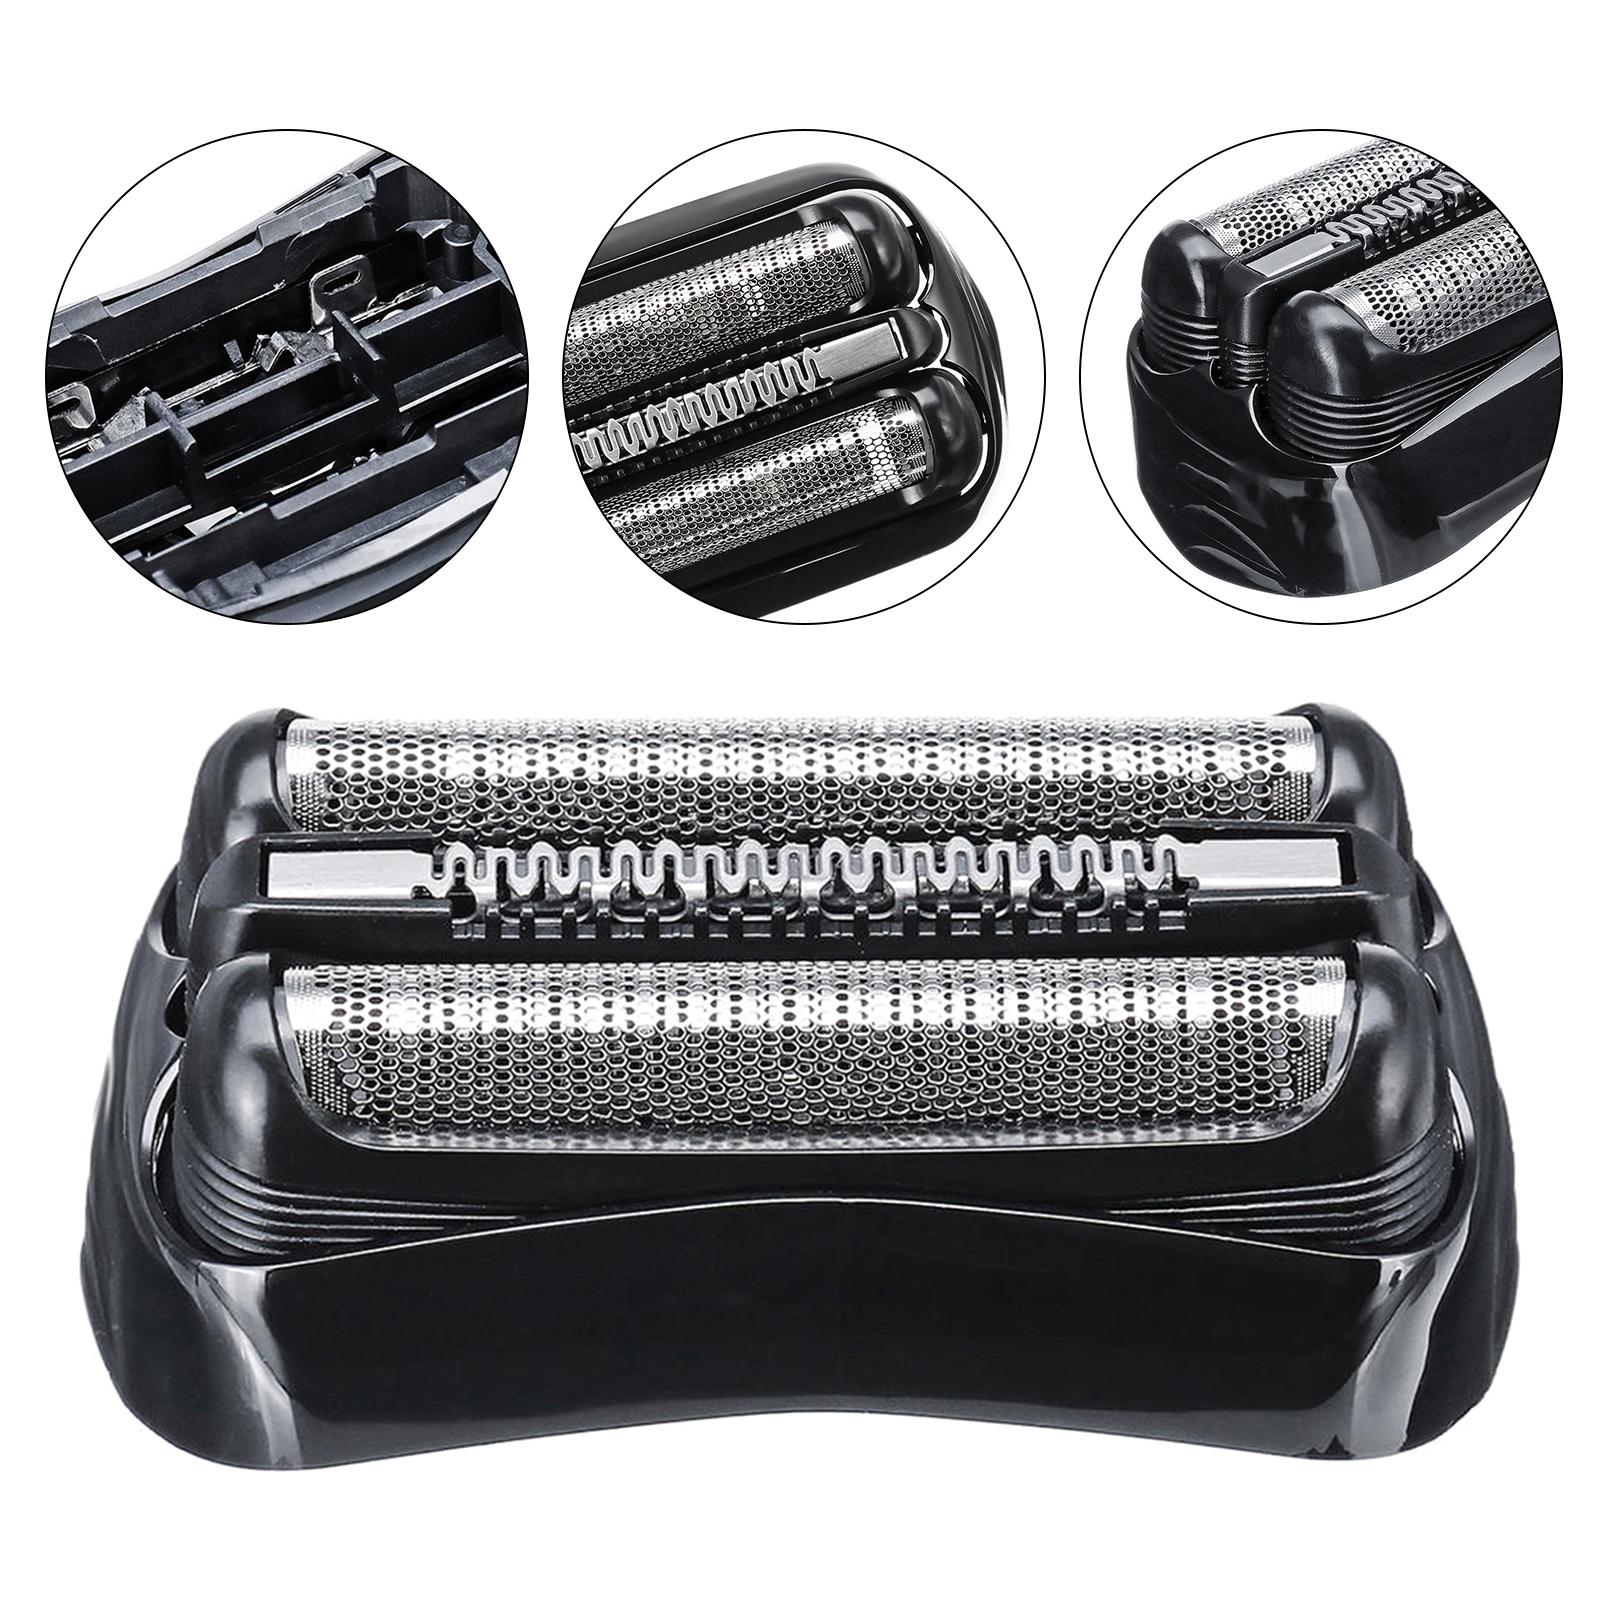 FunCouples 21B Trimmer Shavers Replacement Heads Shaving Foil & Cutter Replacement for Braun Series 3